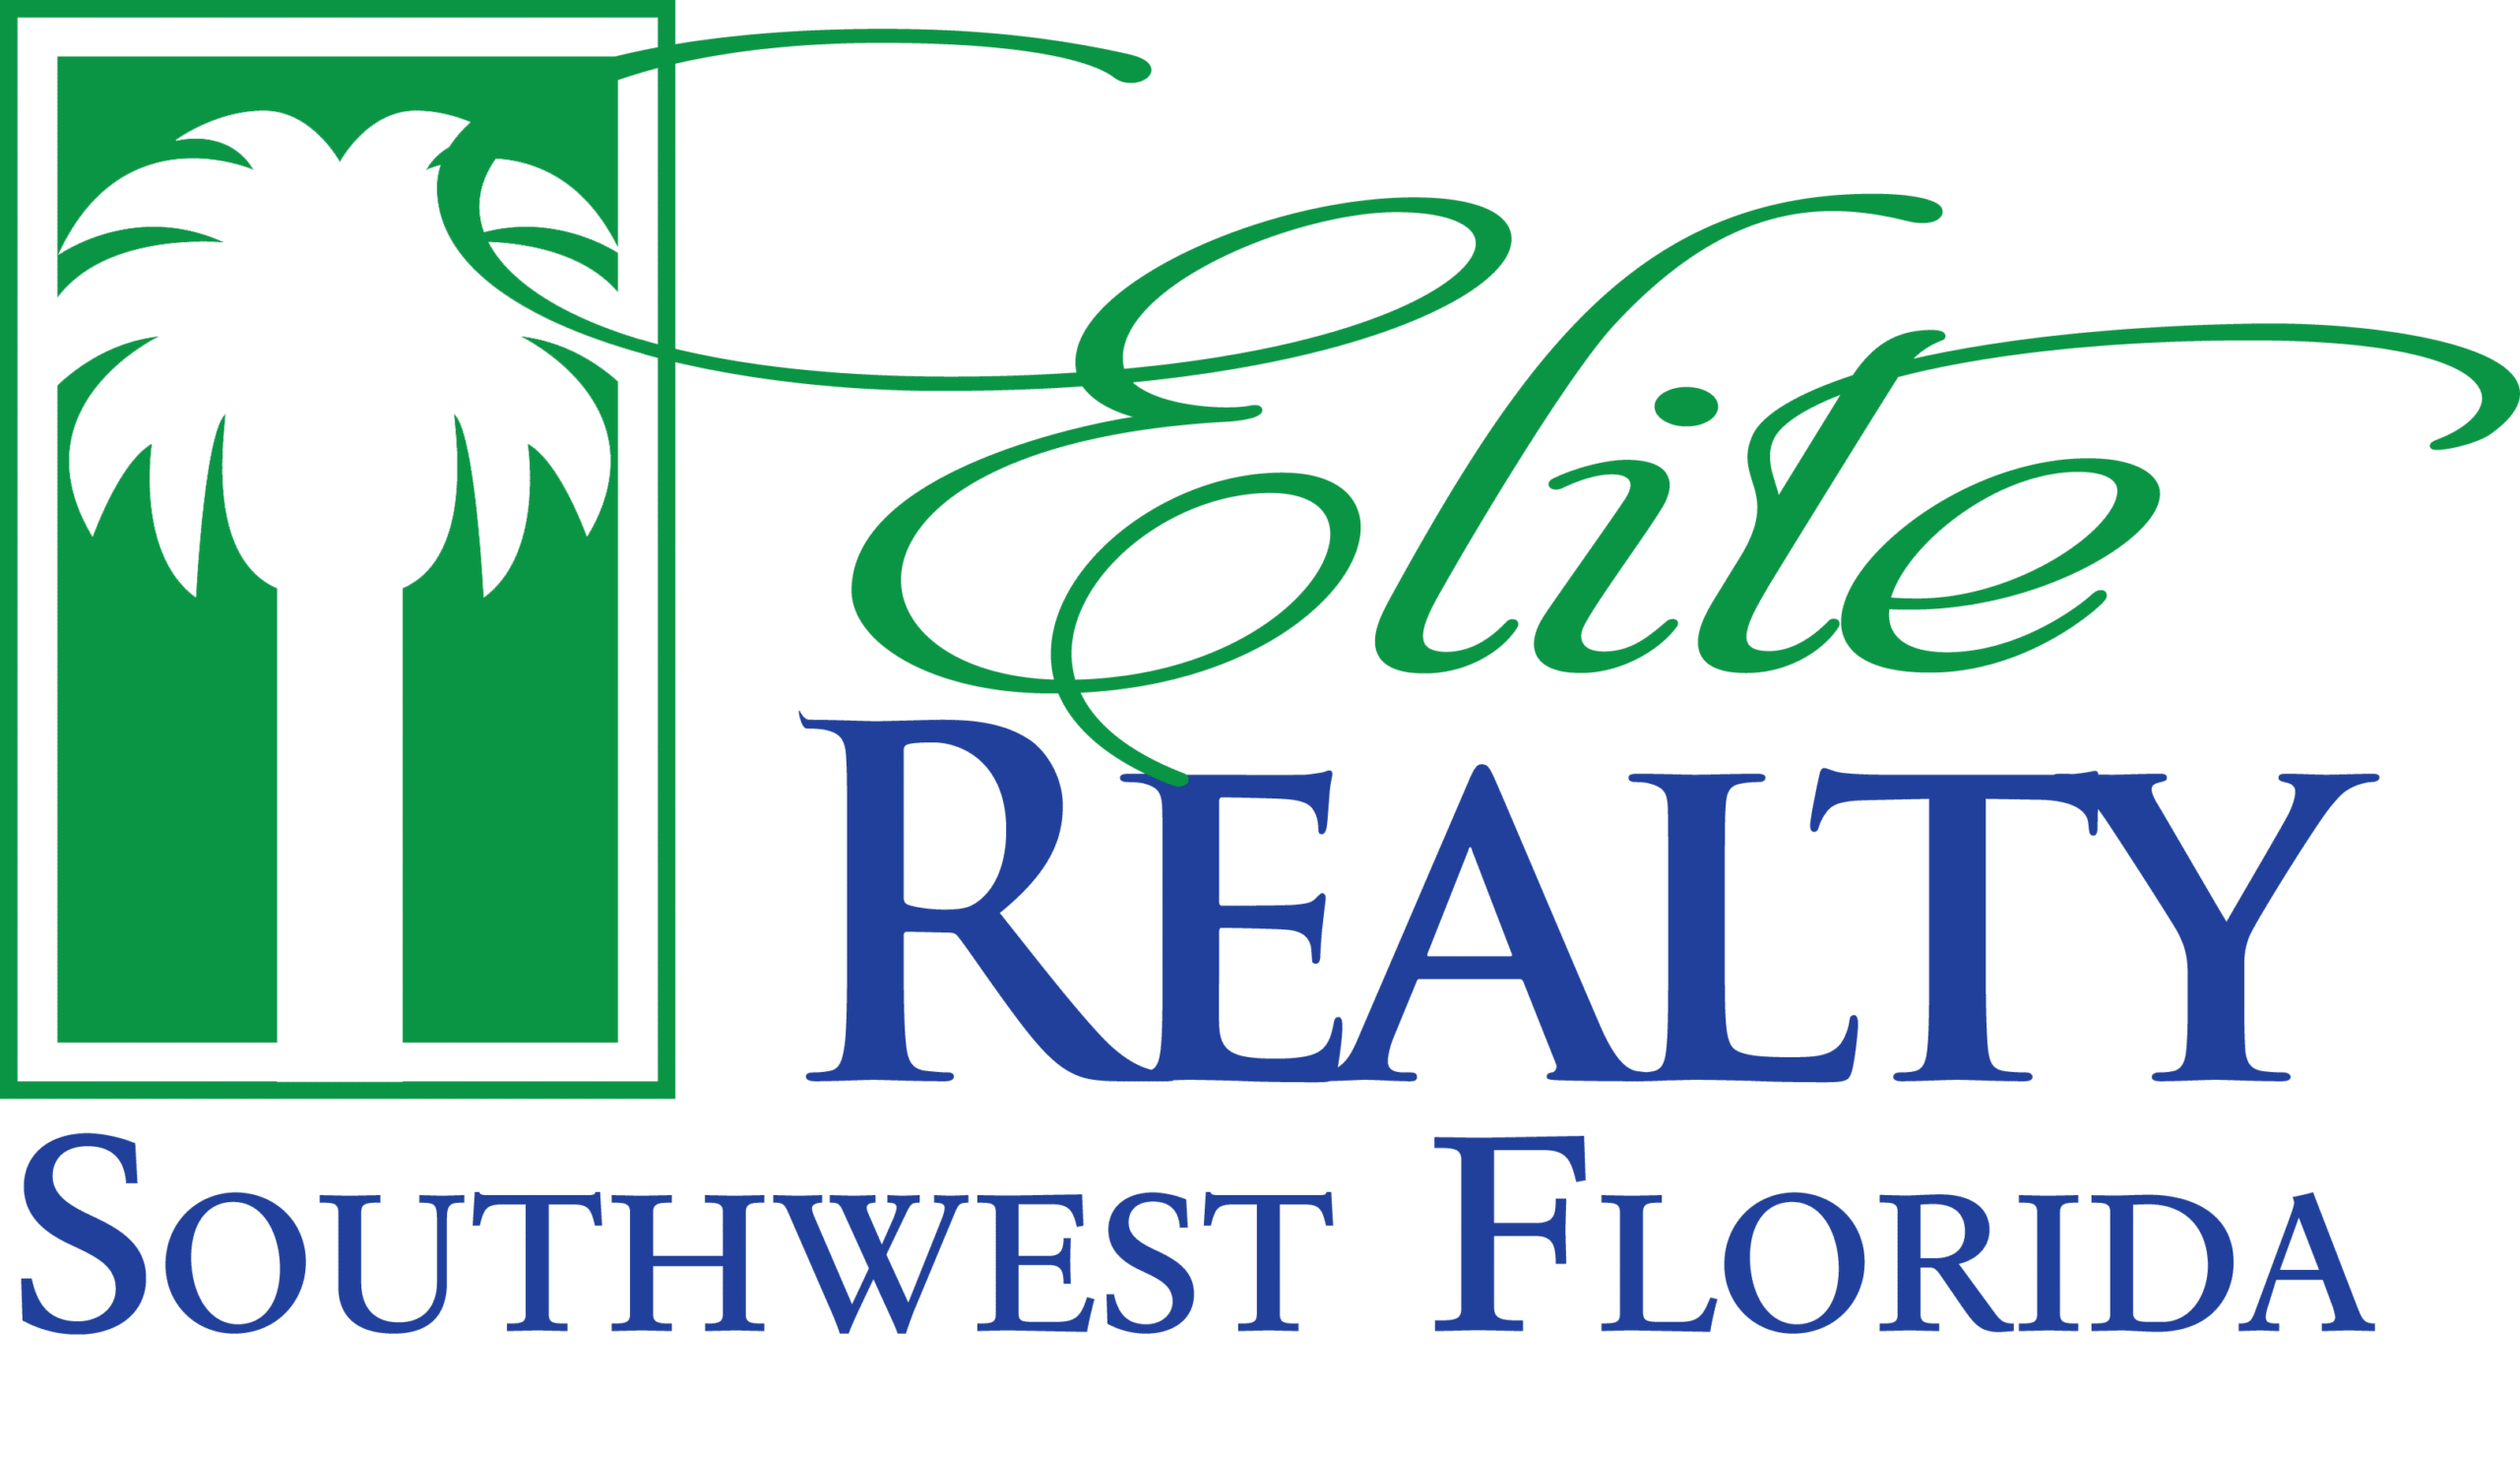 The Jump from Renter to Homeowner in Florida Among the Most Reasonable